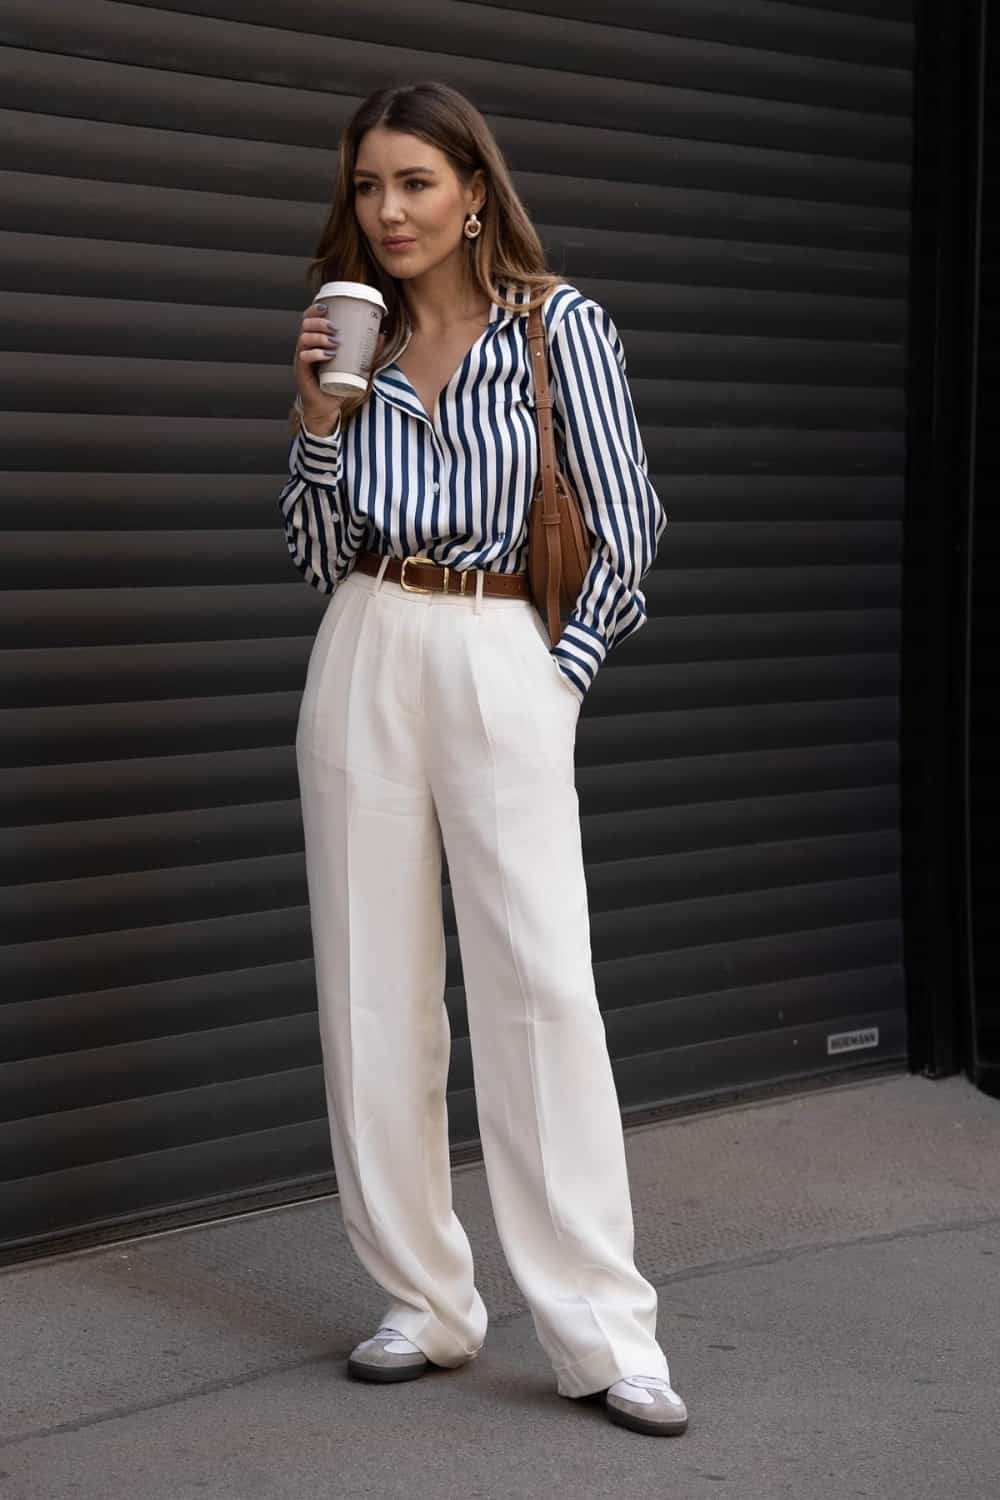 casual work outfits with sneakers - Striped Shirt and White Pants